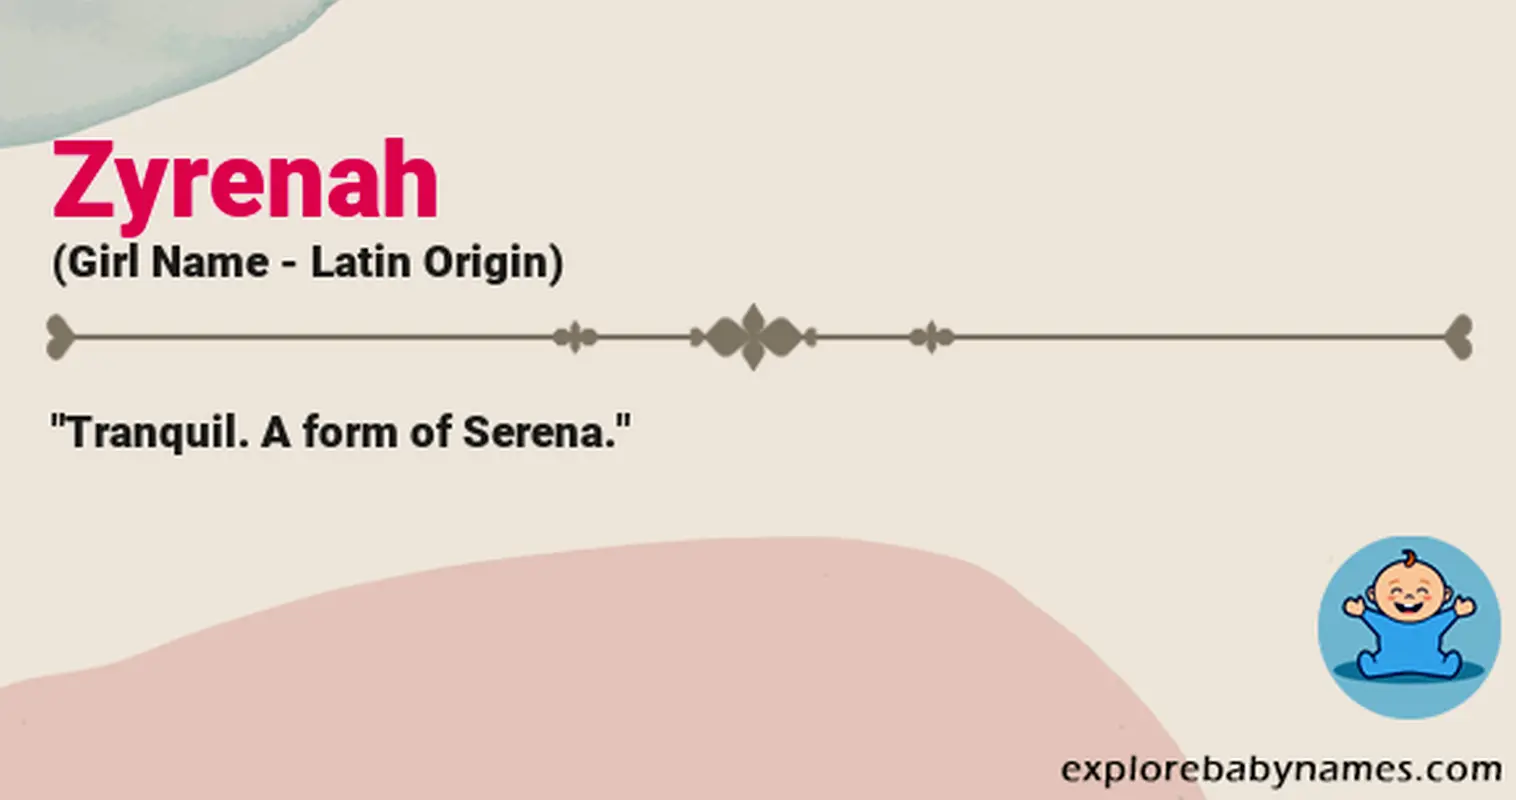 Meaning of Zyrenah